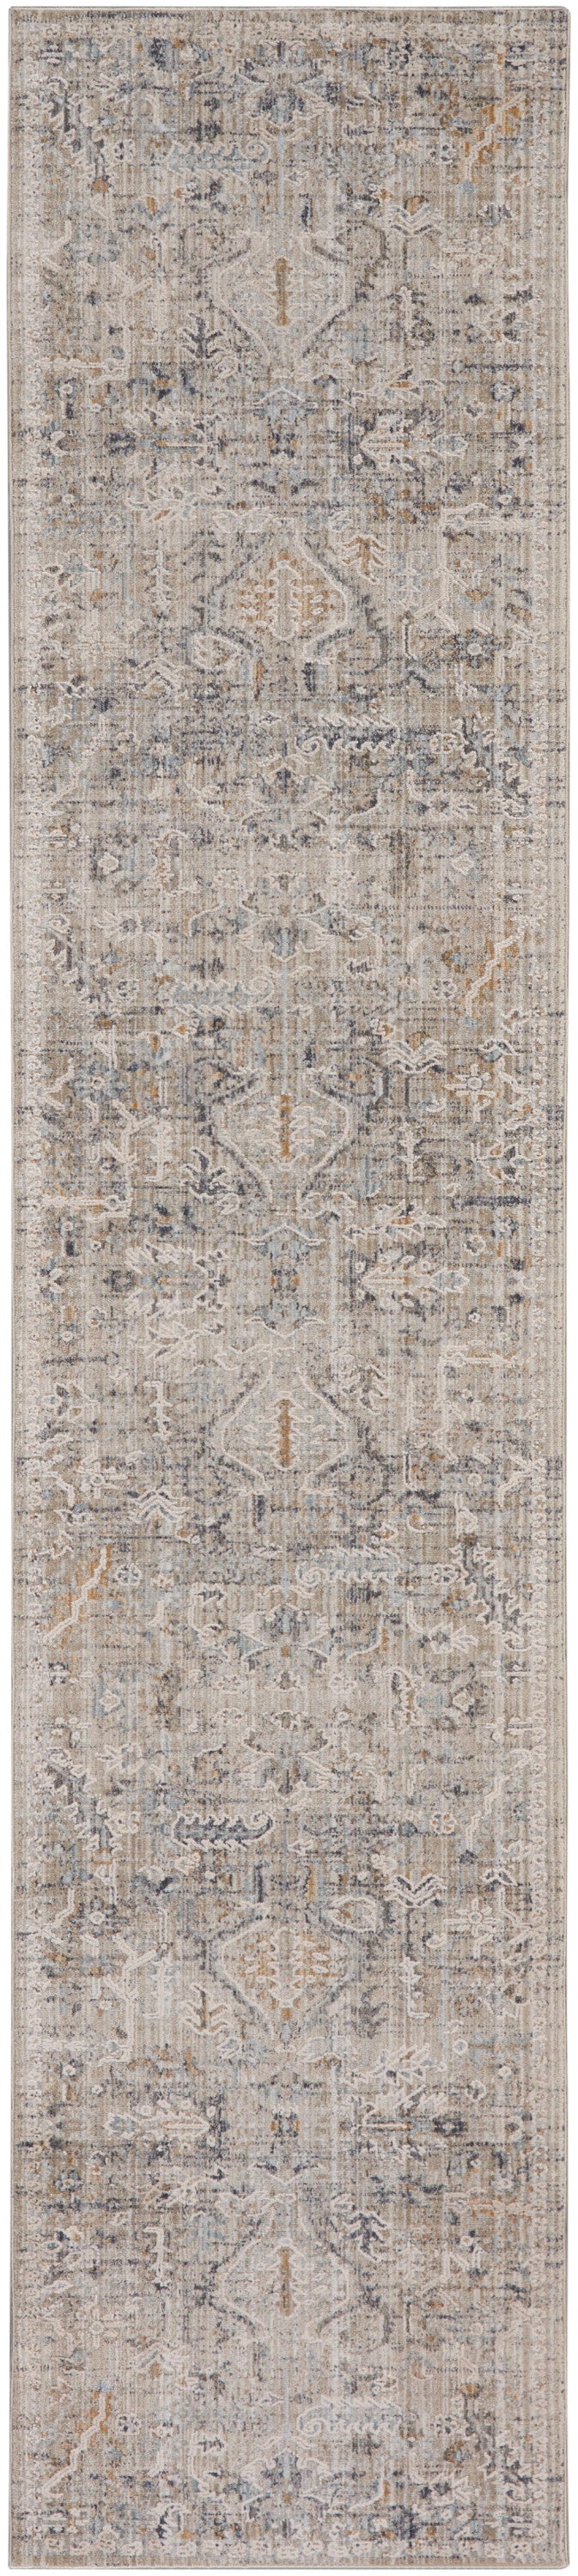 lynx ivory taupe rug by nourison 99446083227 redo 28